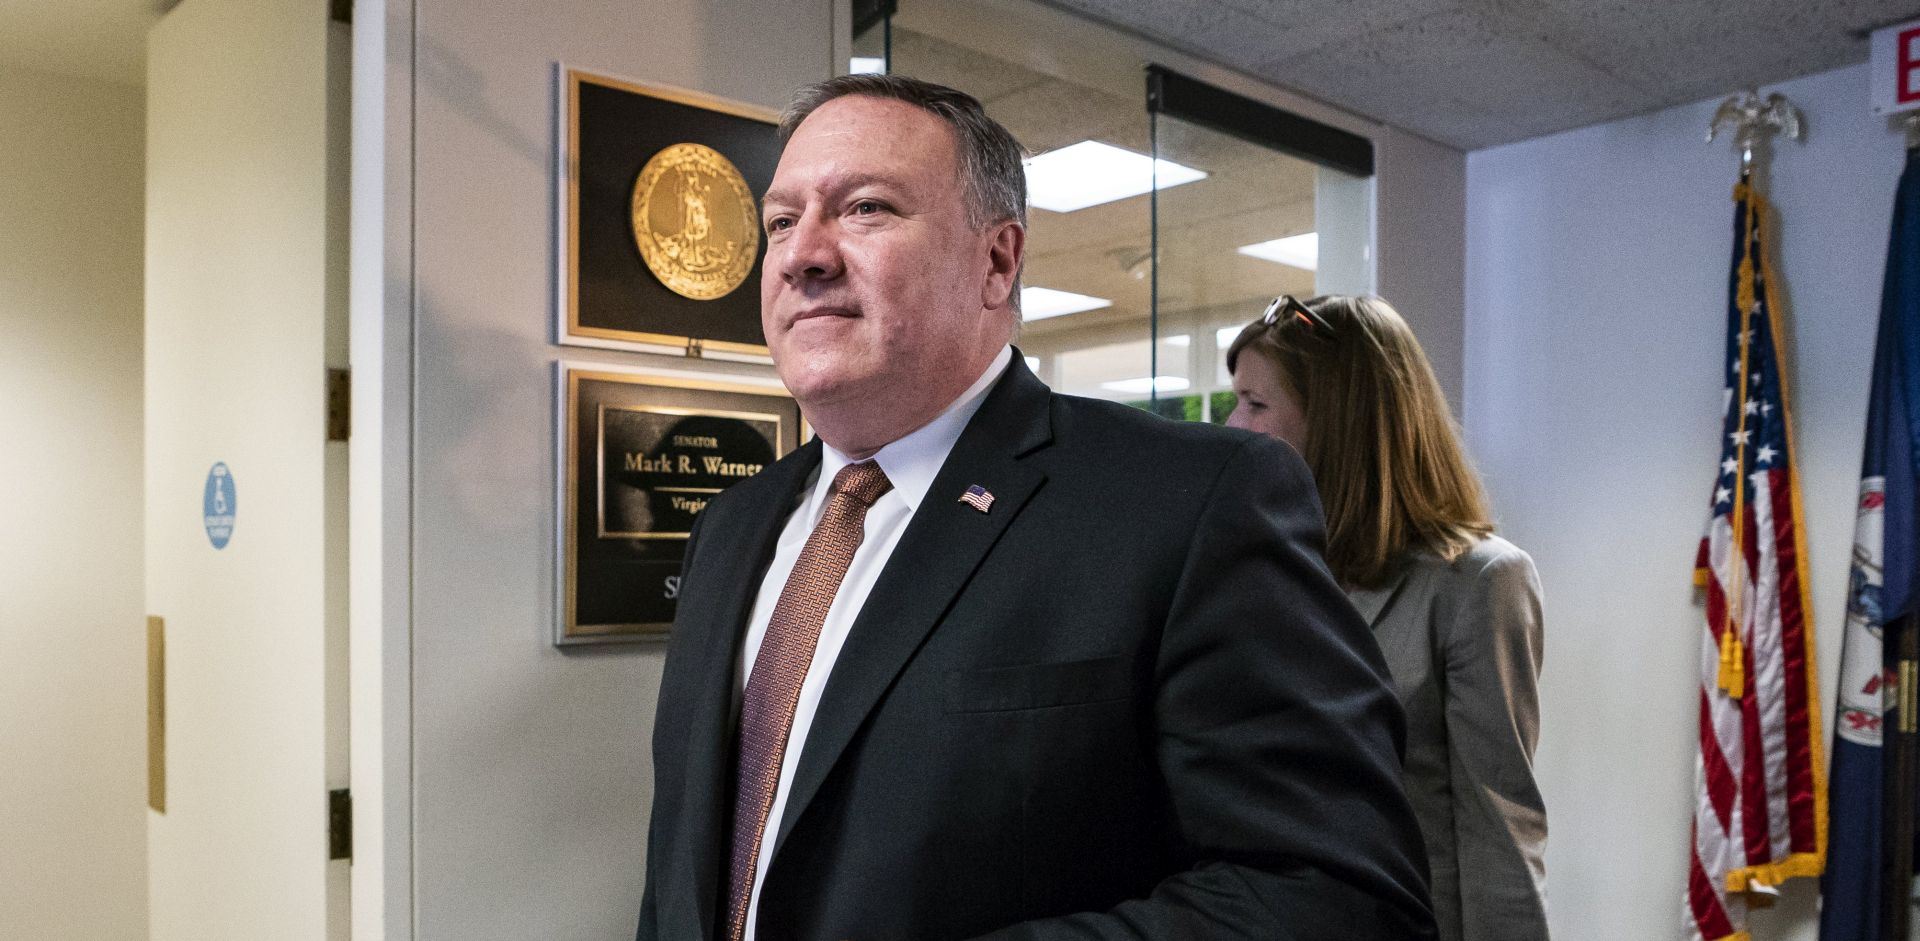 epa06677788 CIA Director Mike Pompeo leaves a meeting with Democratic Senator from Virginia Mark Warner (out of frame) in the Hart Senate Office Building in Washington DC, USA, 18 April 2018. Two weeks ago, Pompeo met secretly with North Korean leader Kim Jong Un in North Korea.  EPA/JIM LO SCALZO